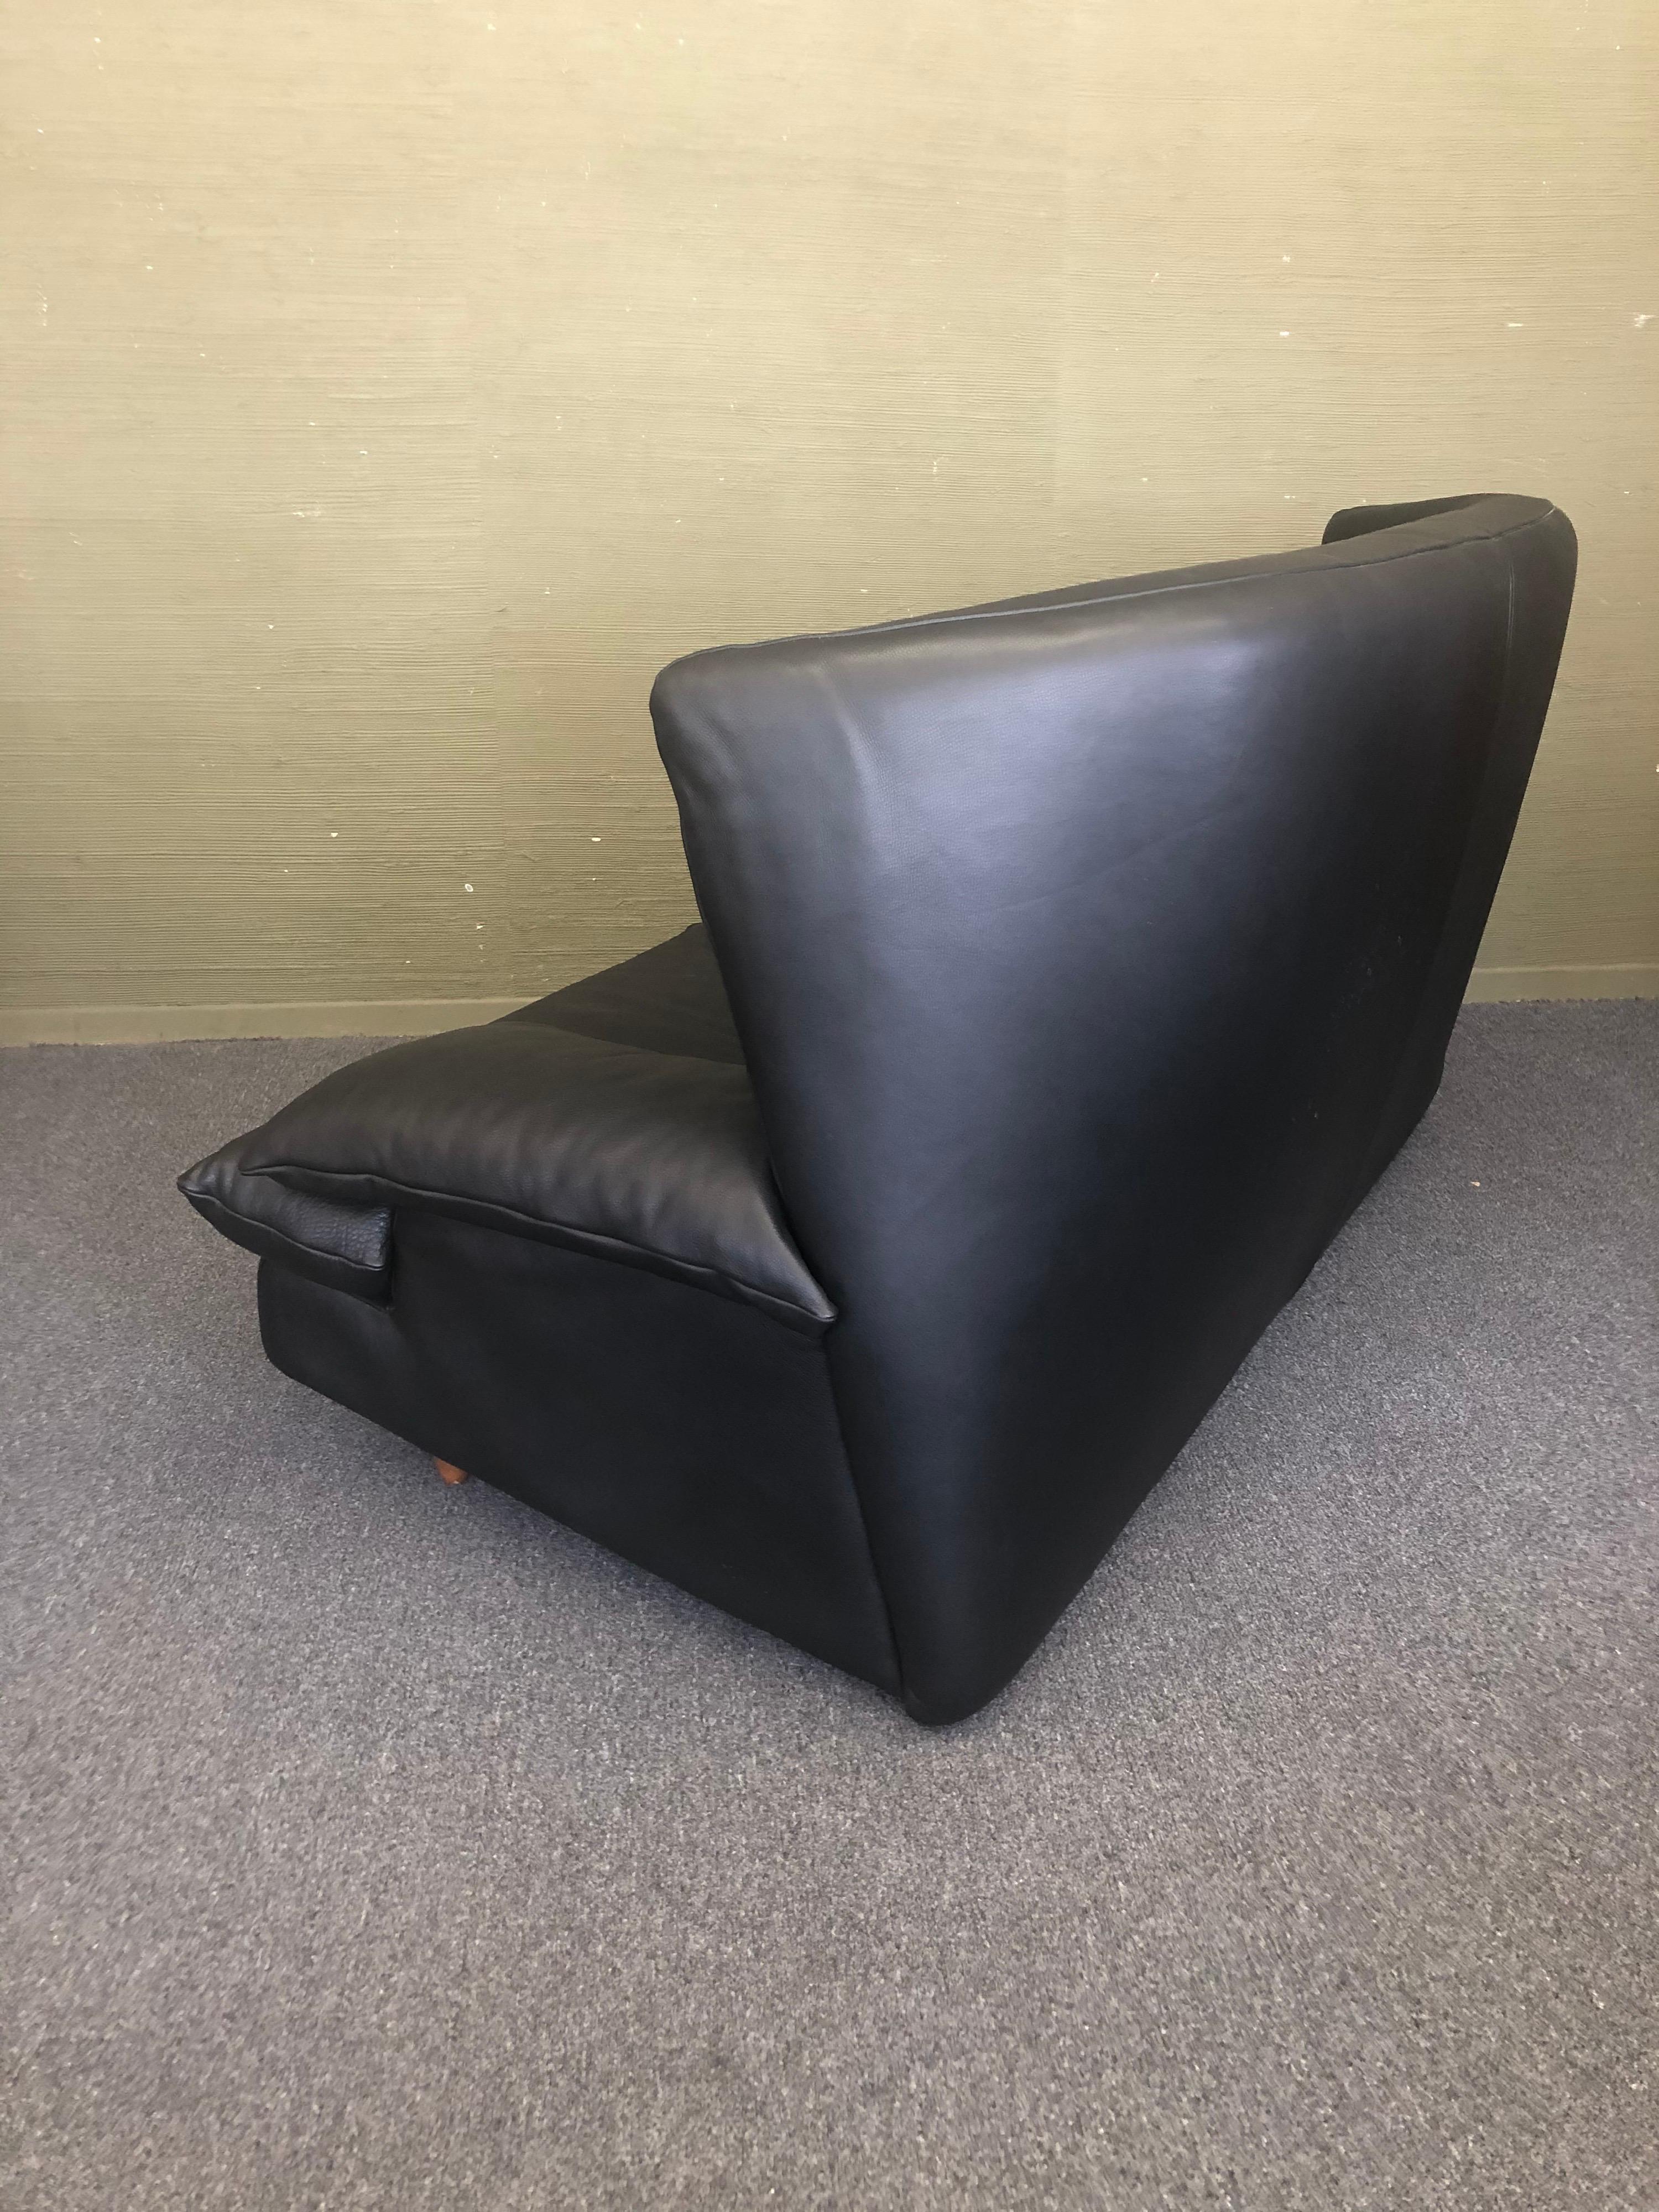 A very nice black leather Postmodern loveseat by I4 Mariani for the Pace Collection, circa late 1980s. The piece is in great condition with super high quality leather and Italian craftsmanship. Comes with two lumbar pillows.